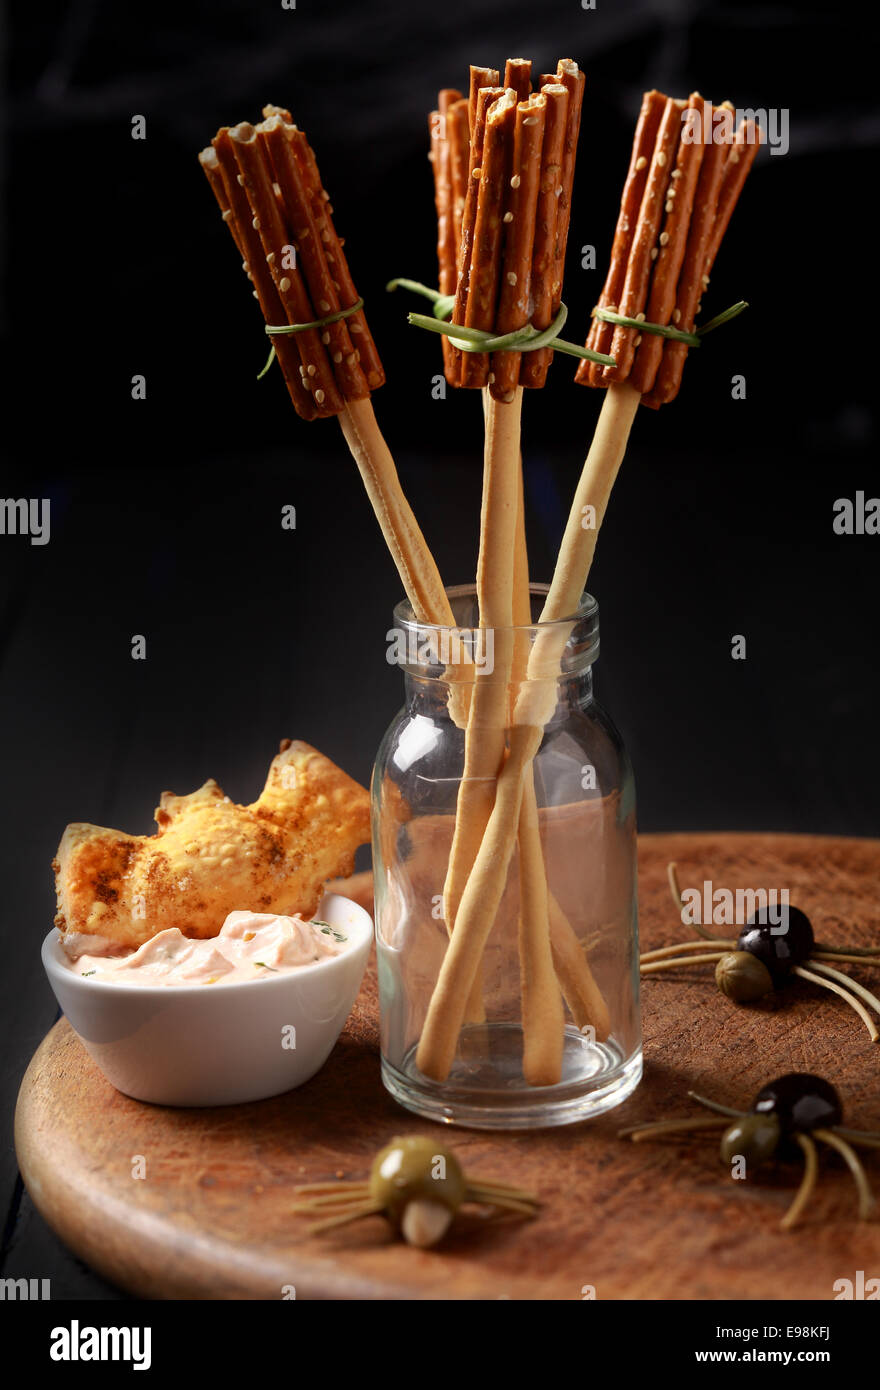 Creative Halloween snacks and appetizers with witches broomsticks made from bread sticks and pretzels with creepy spiders of olives and spaghetti on a table at a Halloween celebration Stock Photo